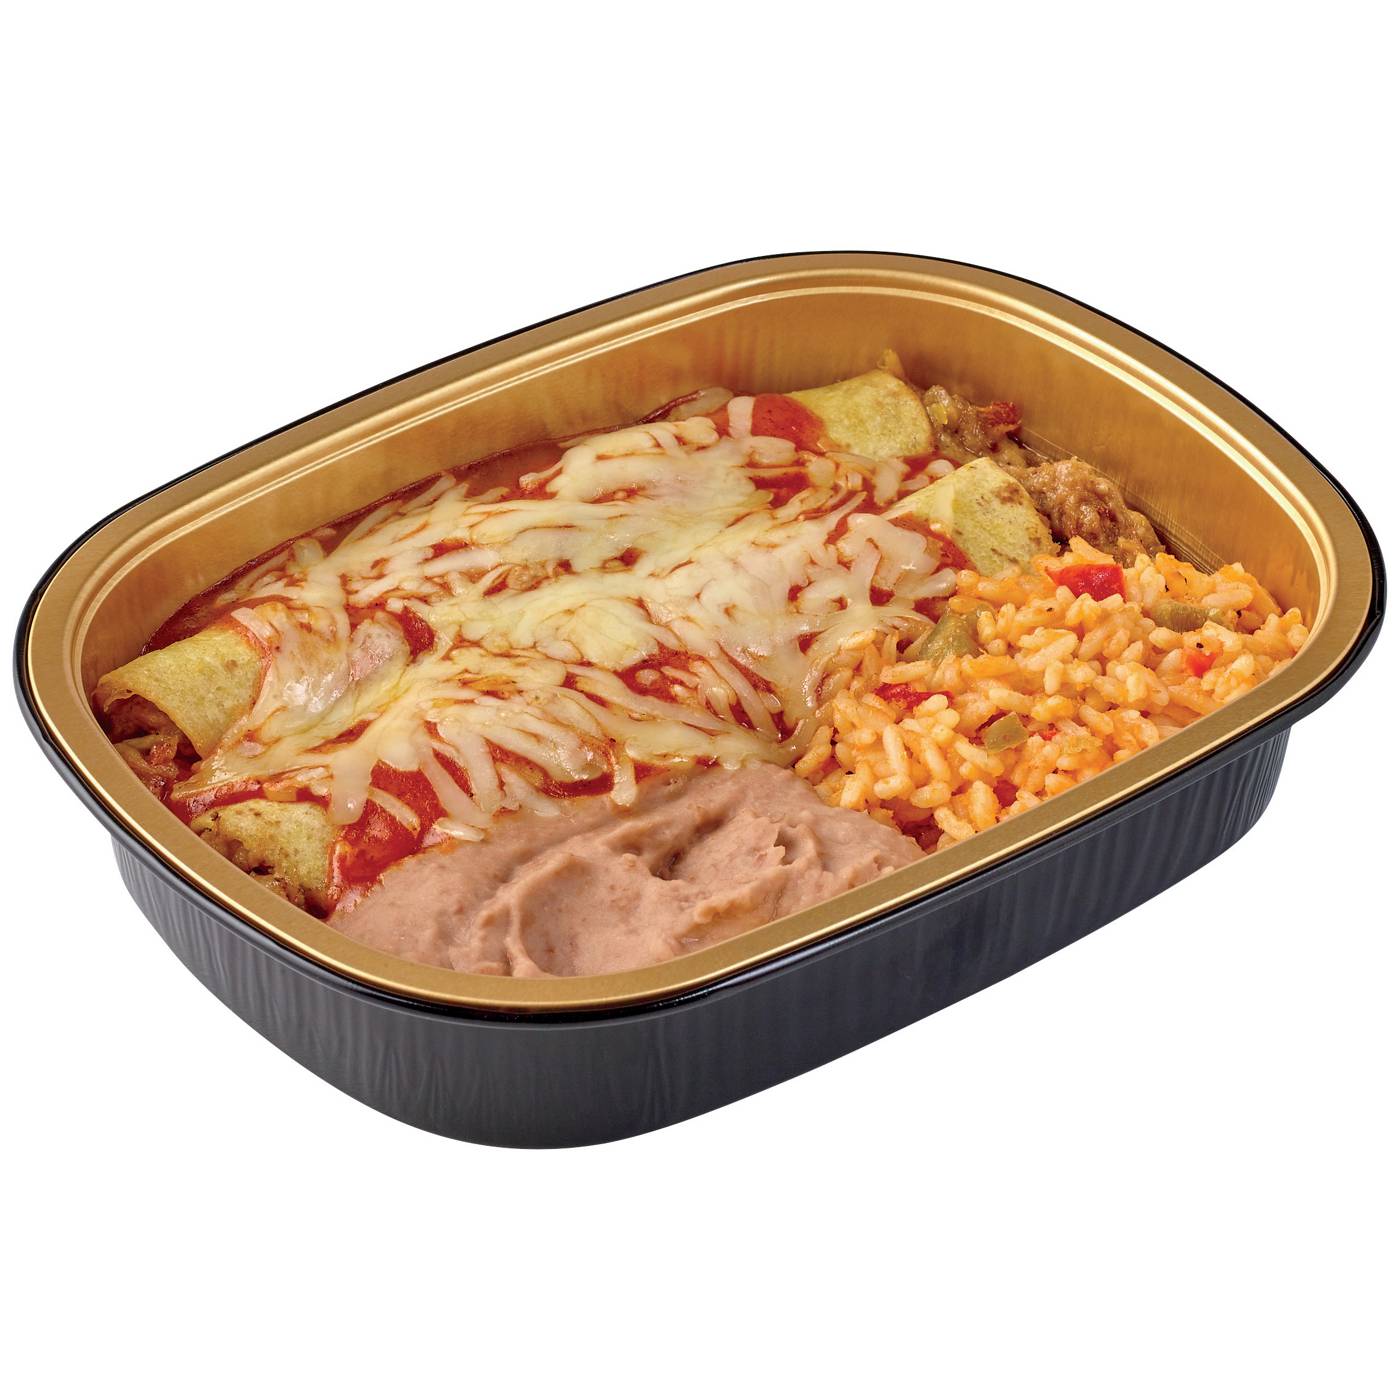 Meal Simple by H-E-B Brisket Enchiladas, Mexican Rice & Refried Beans; image 2 of 3